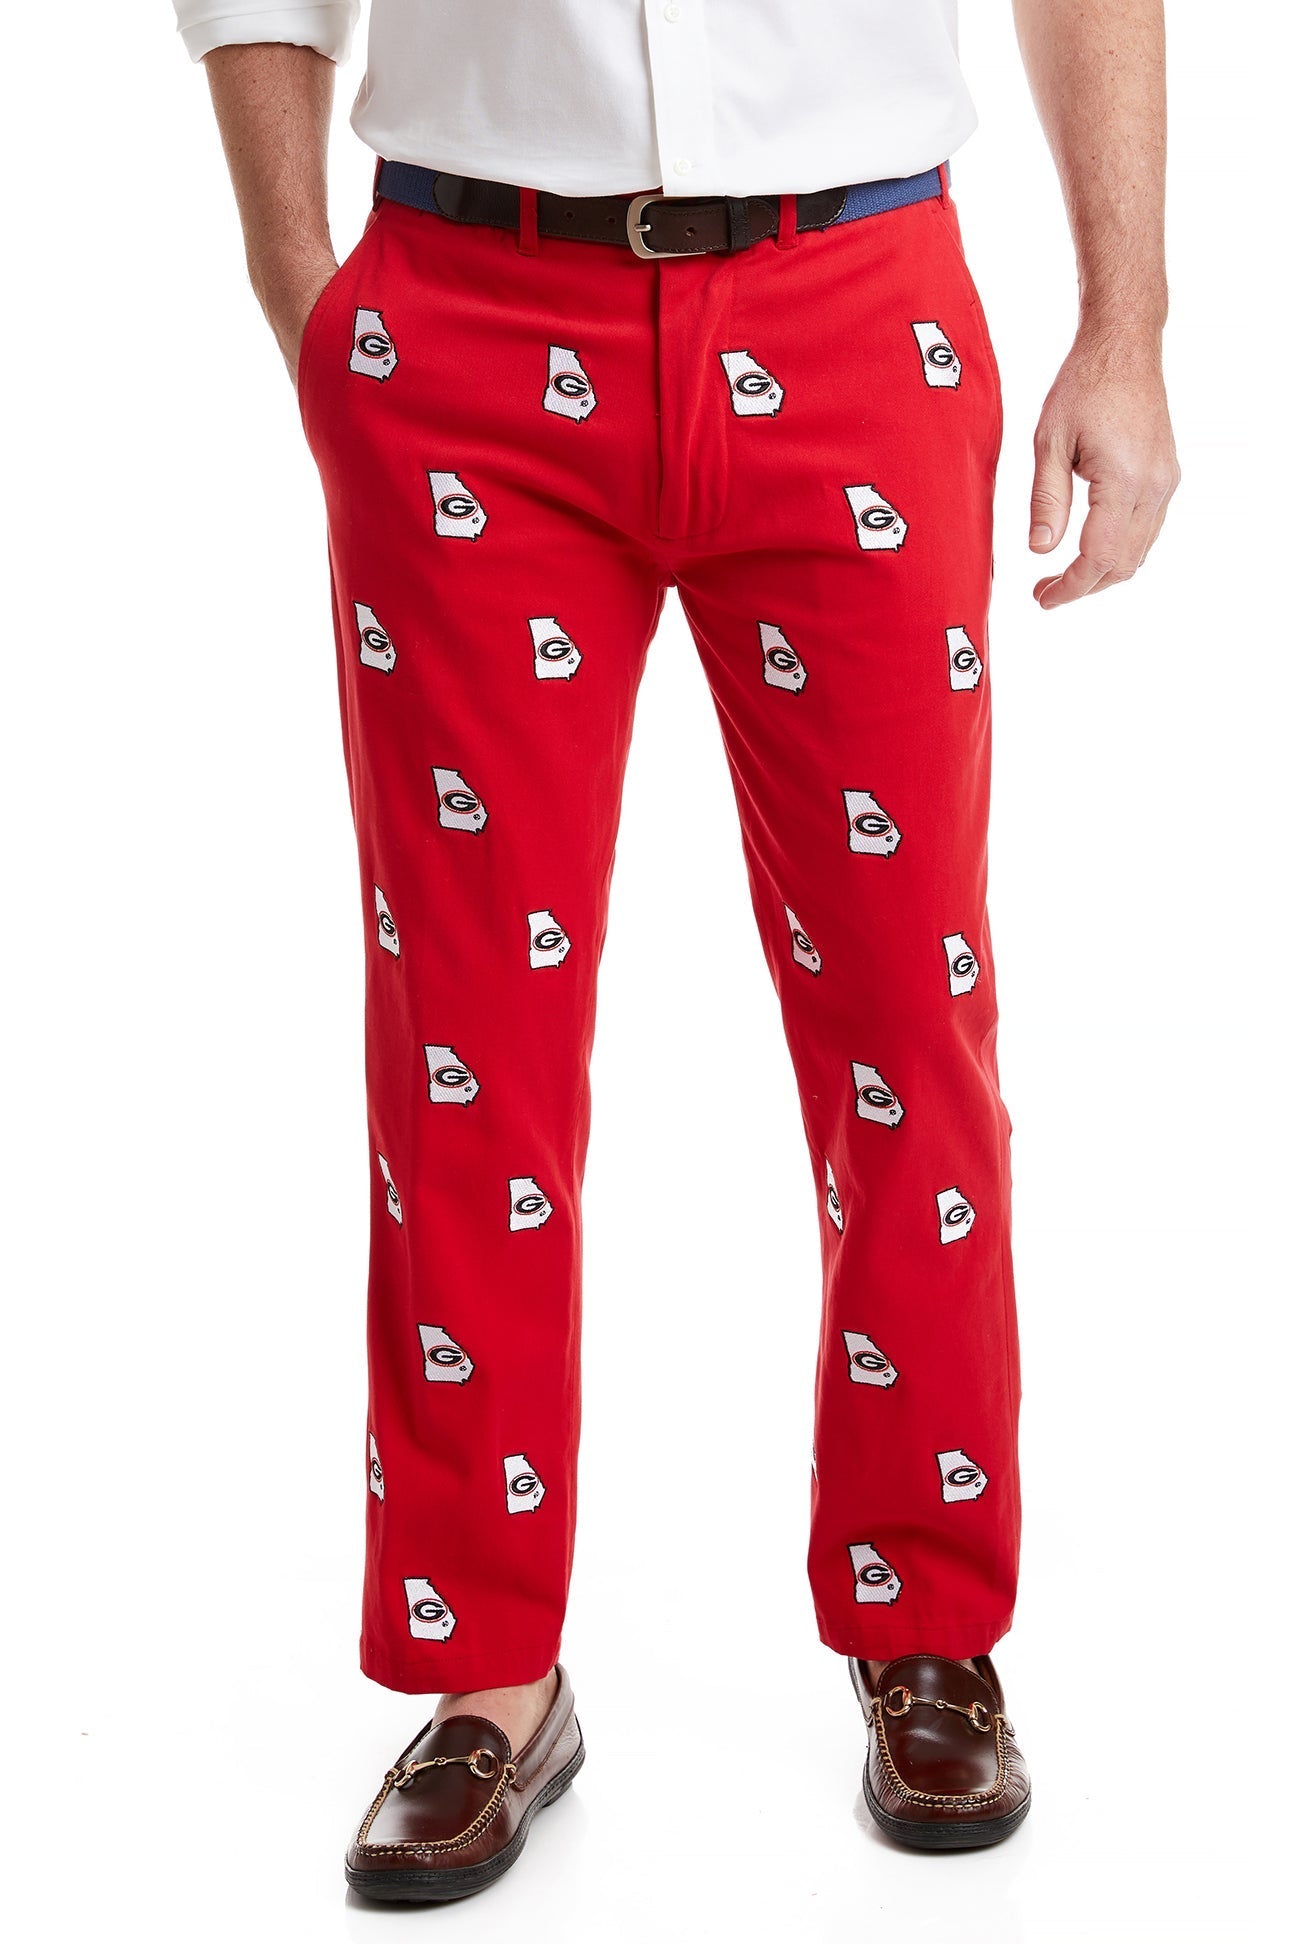 Collegiate Stretch Twill Pant Bulldog Red with UGA MENS EMBROIDERED PANTS Castaway Nantucket Island